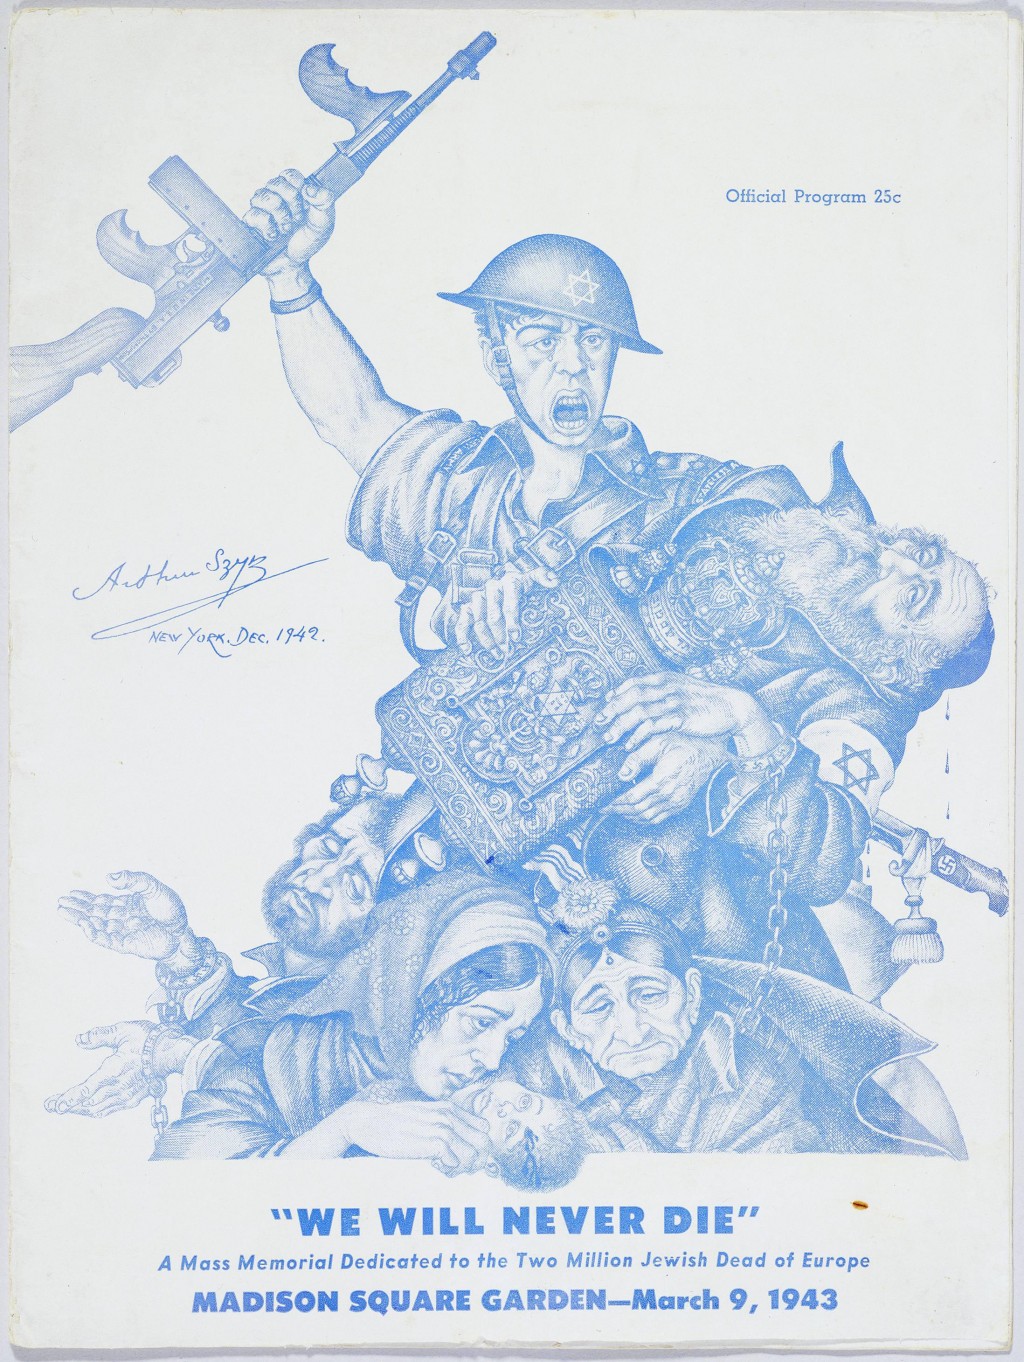 The program cover for "We Will Never Die" featured Arthur Szyk’s "Tears of Rage" artwork. The cover's original dimensions are: 12 1/16" x 9 1/16" x 3/16.